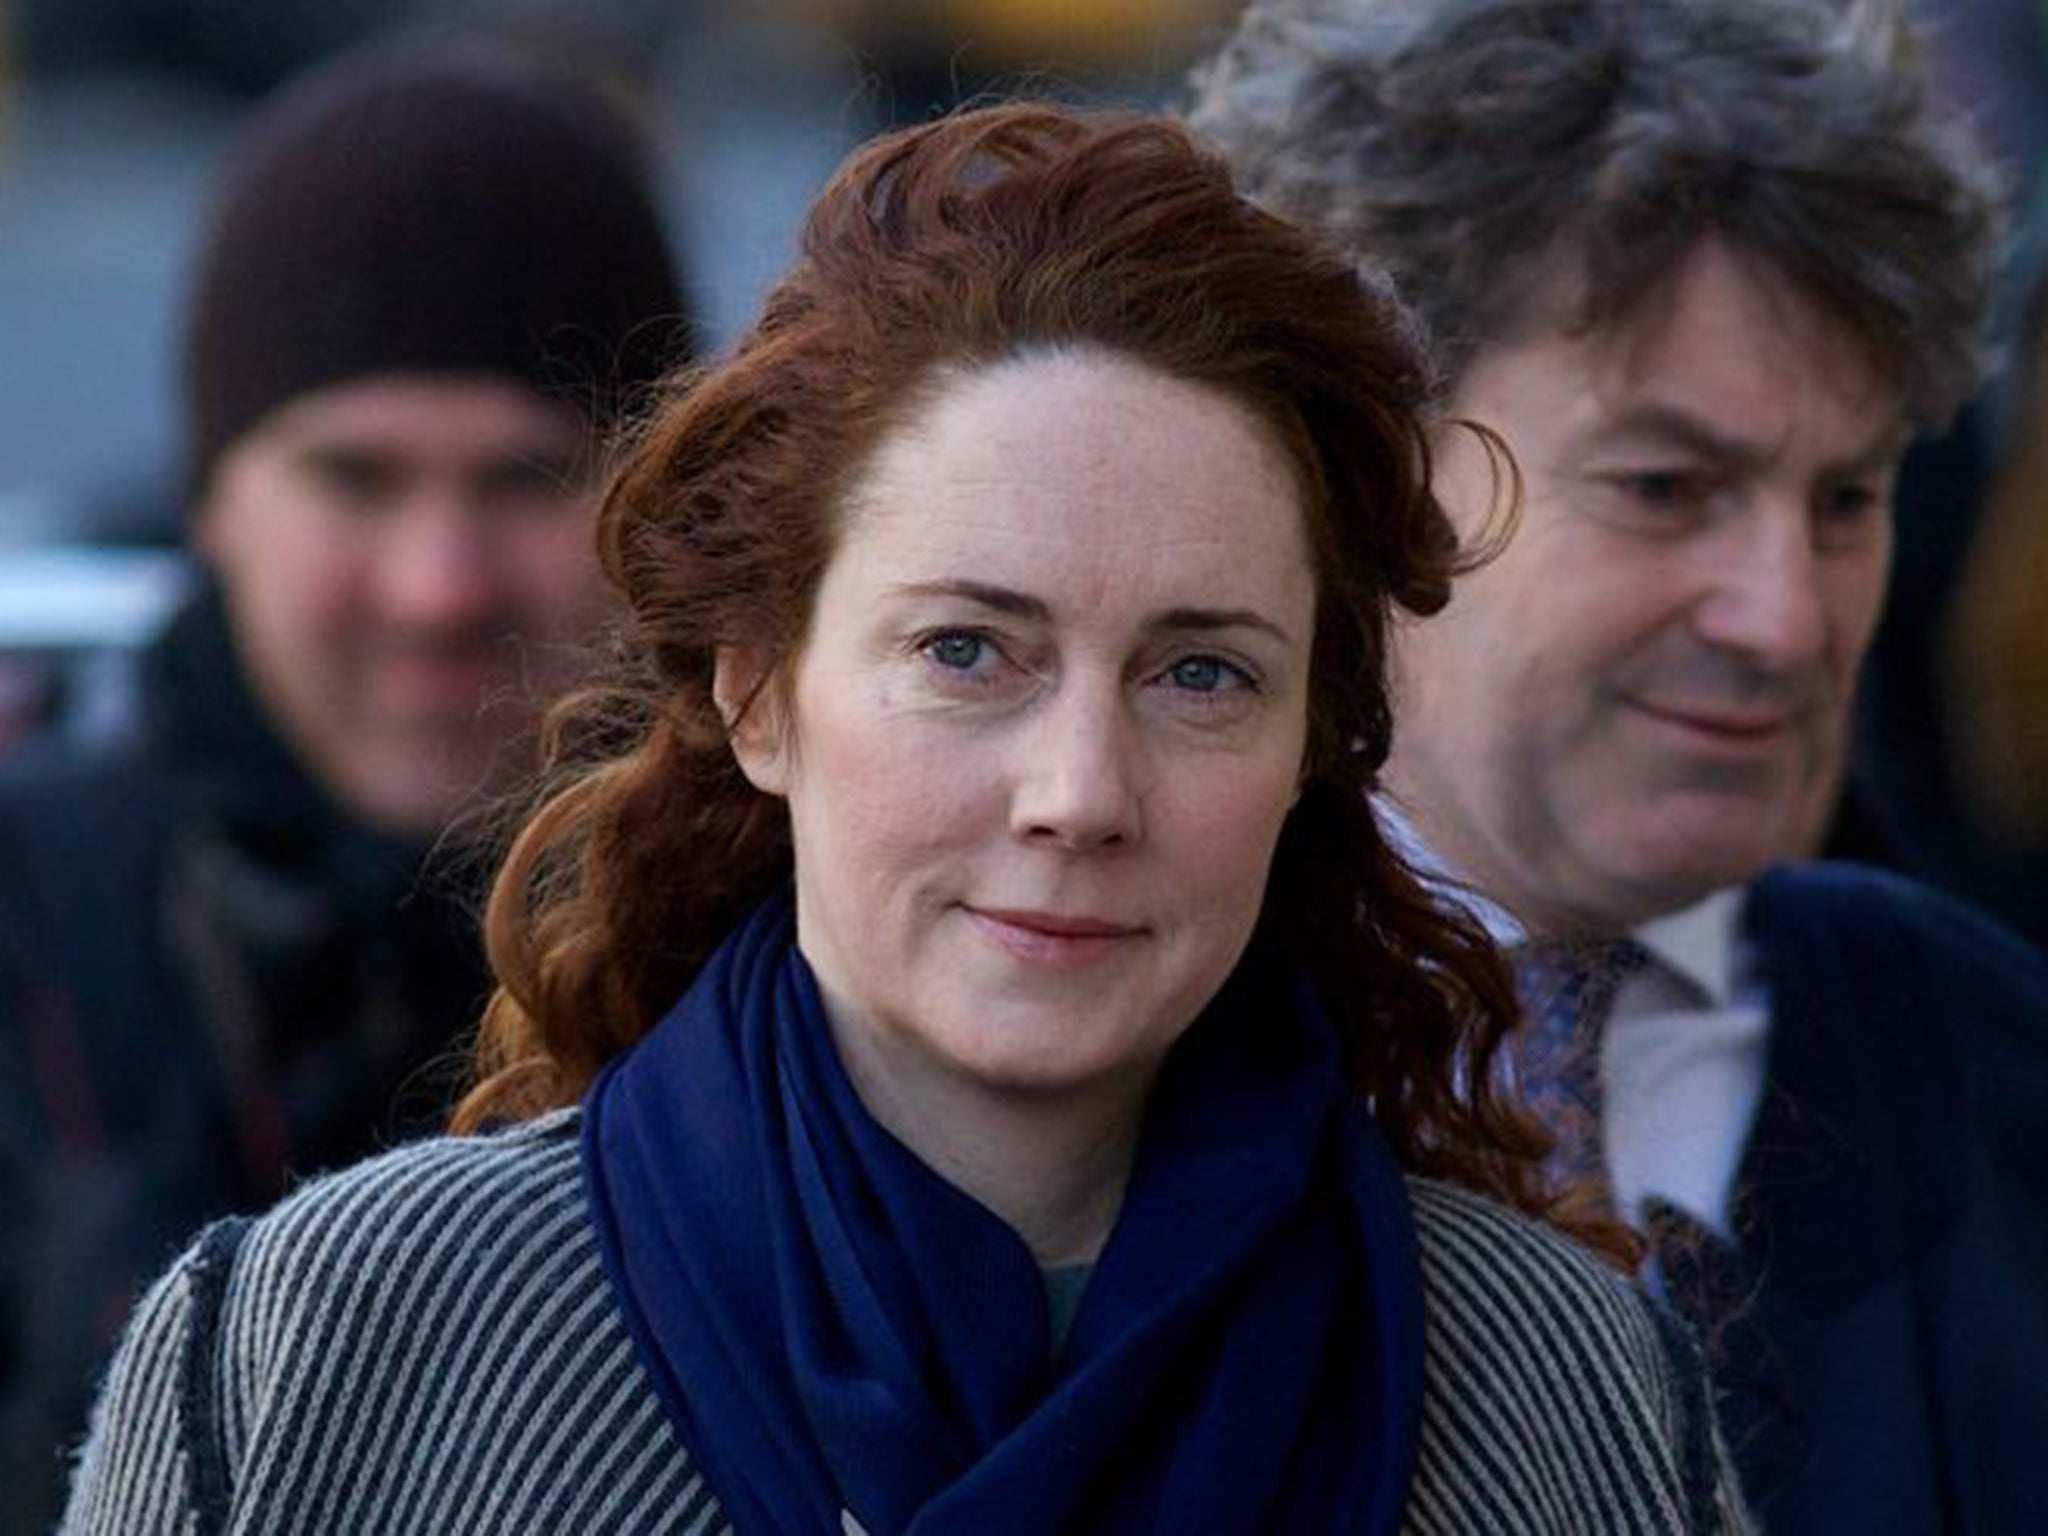 Rebekah Brooks before she was cleared of phone-hacking charges in 2014